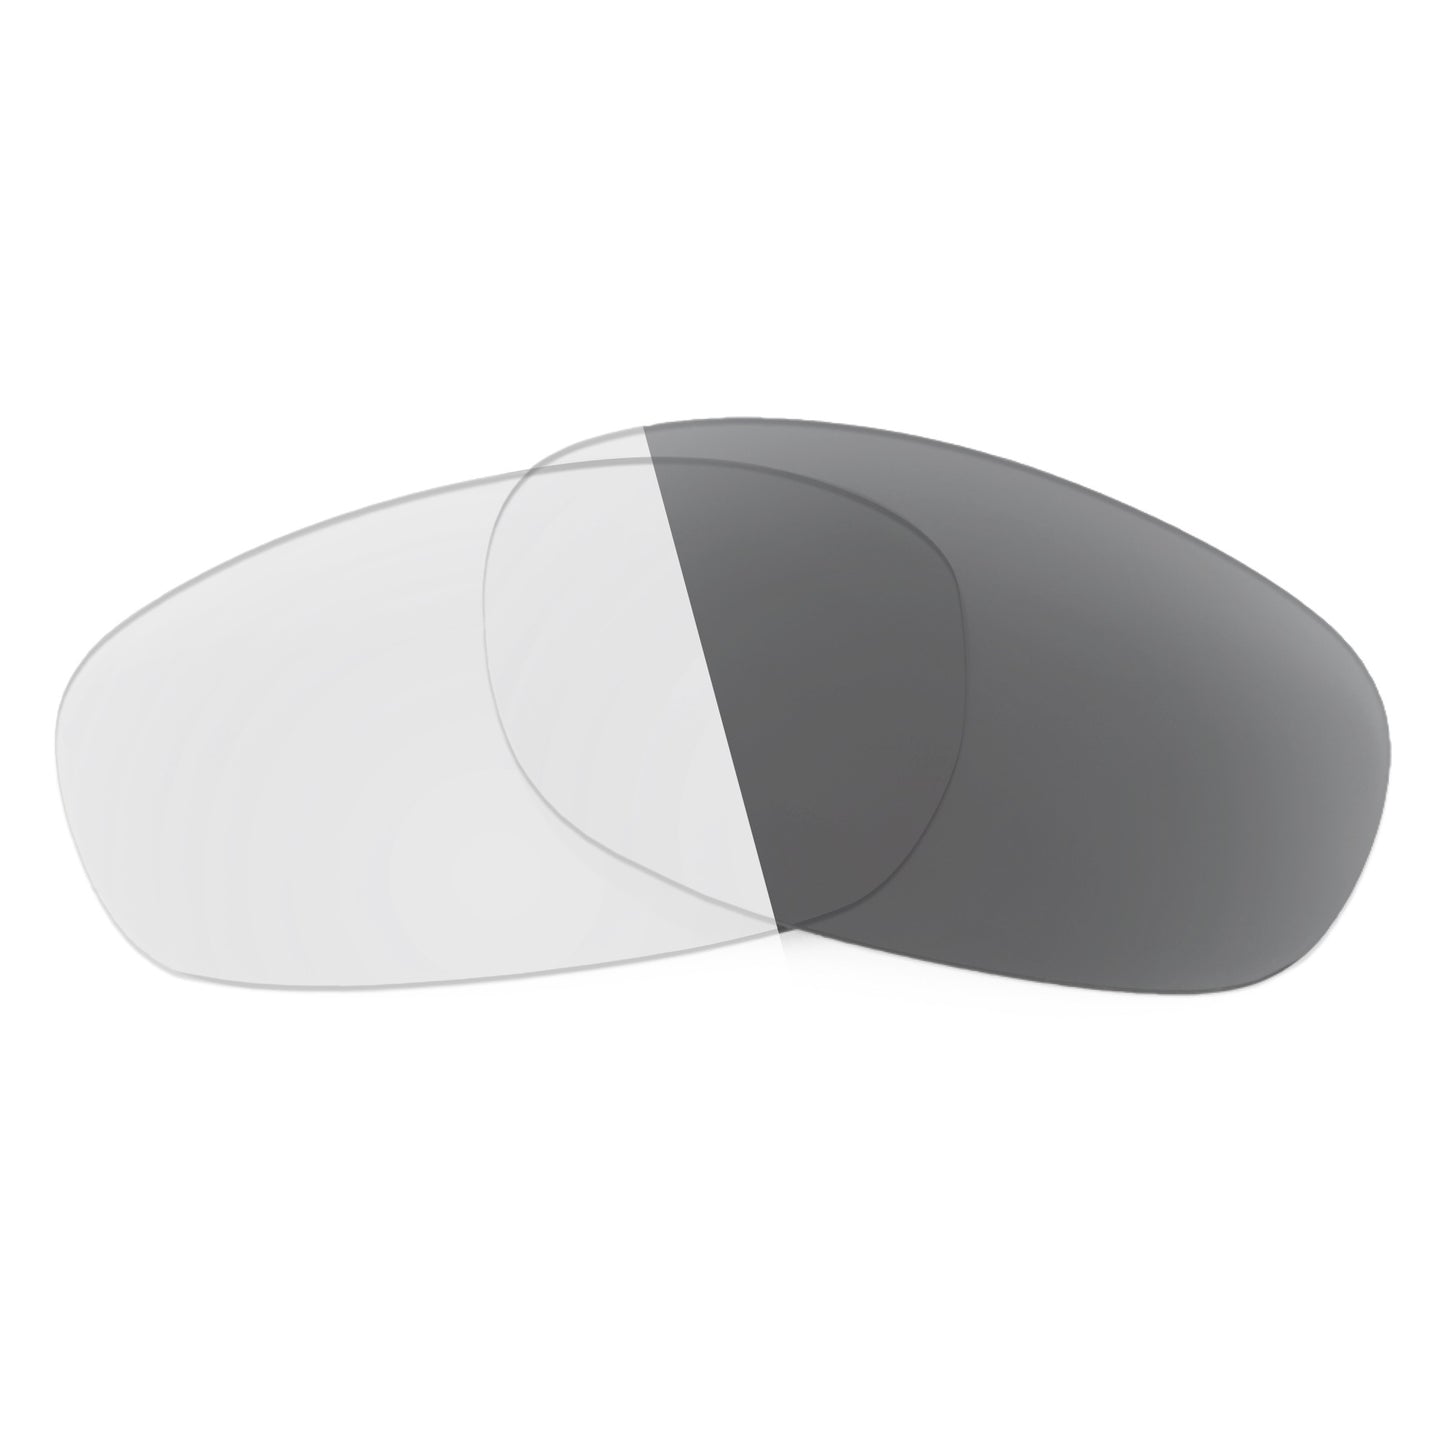 Revant replacement lenses for Ray-Ban RB4119 59mm Non-Polarized Adapt Gray Photochromic